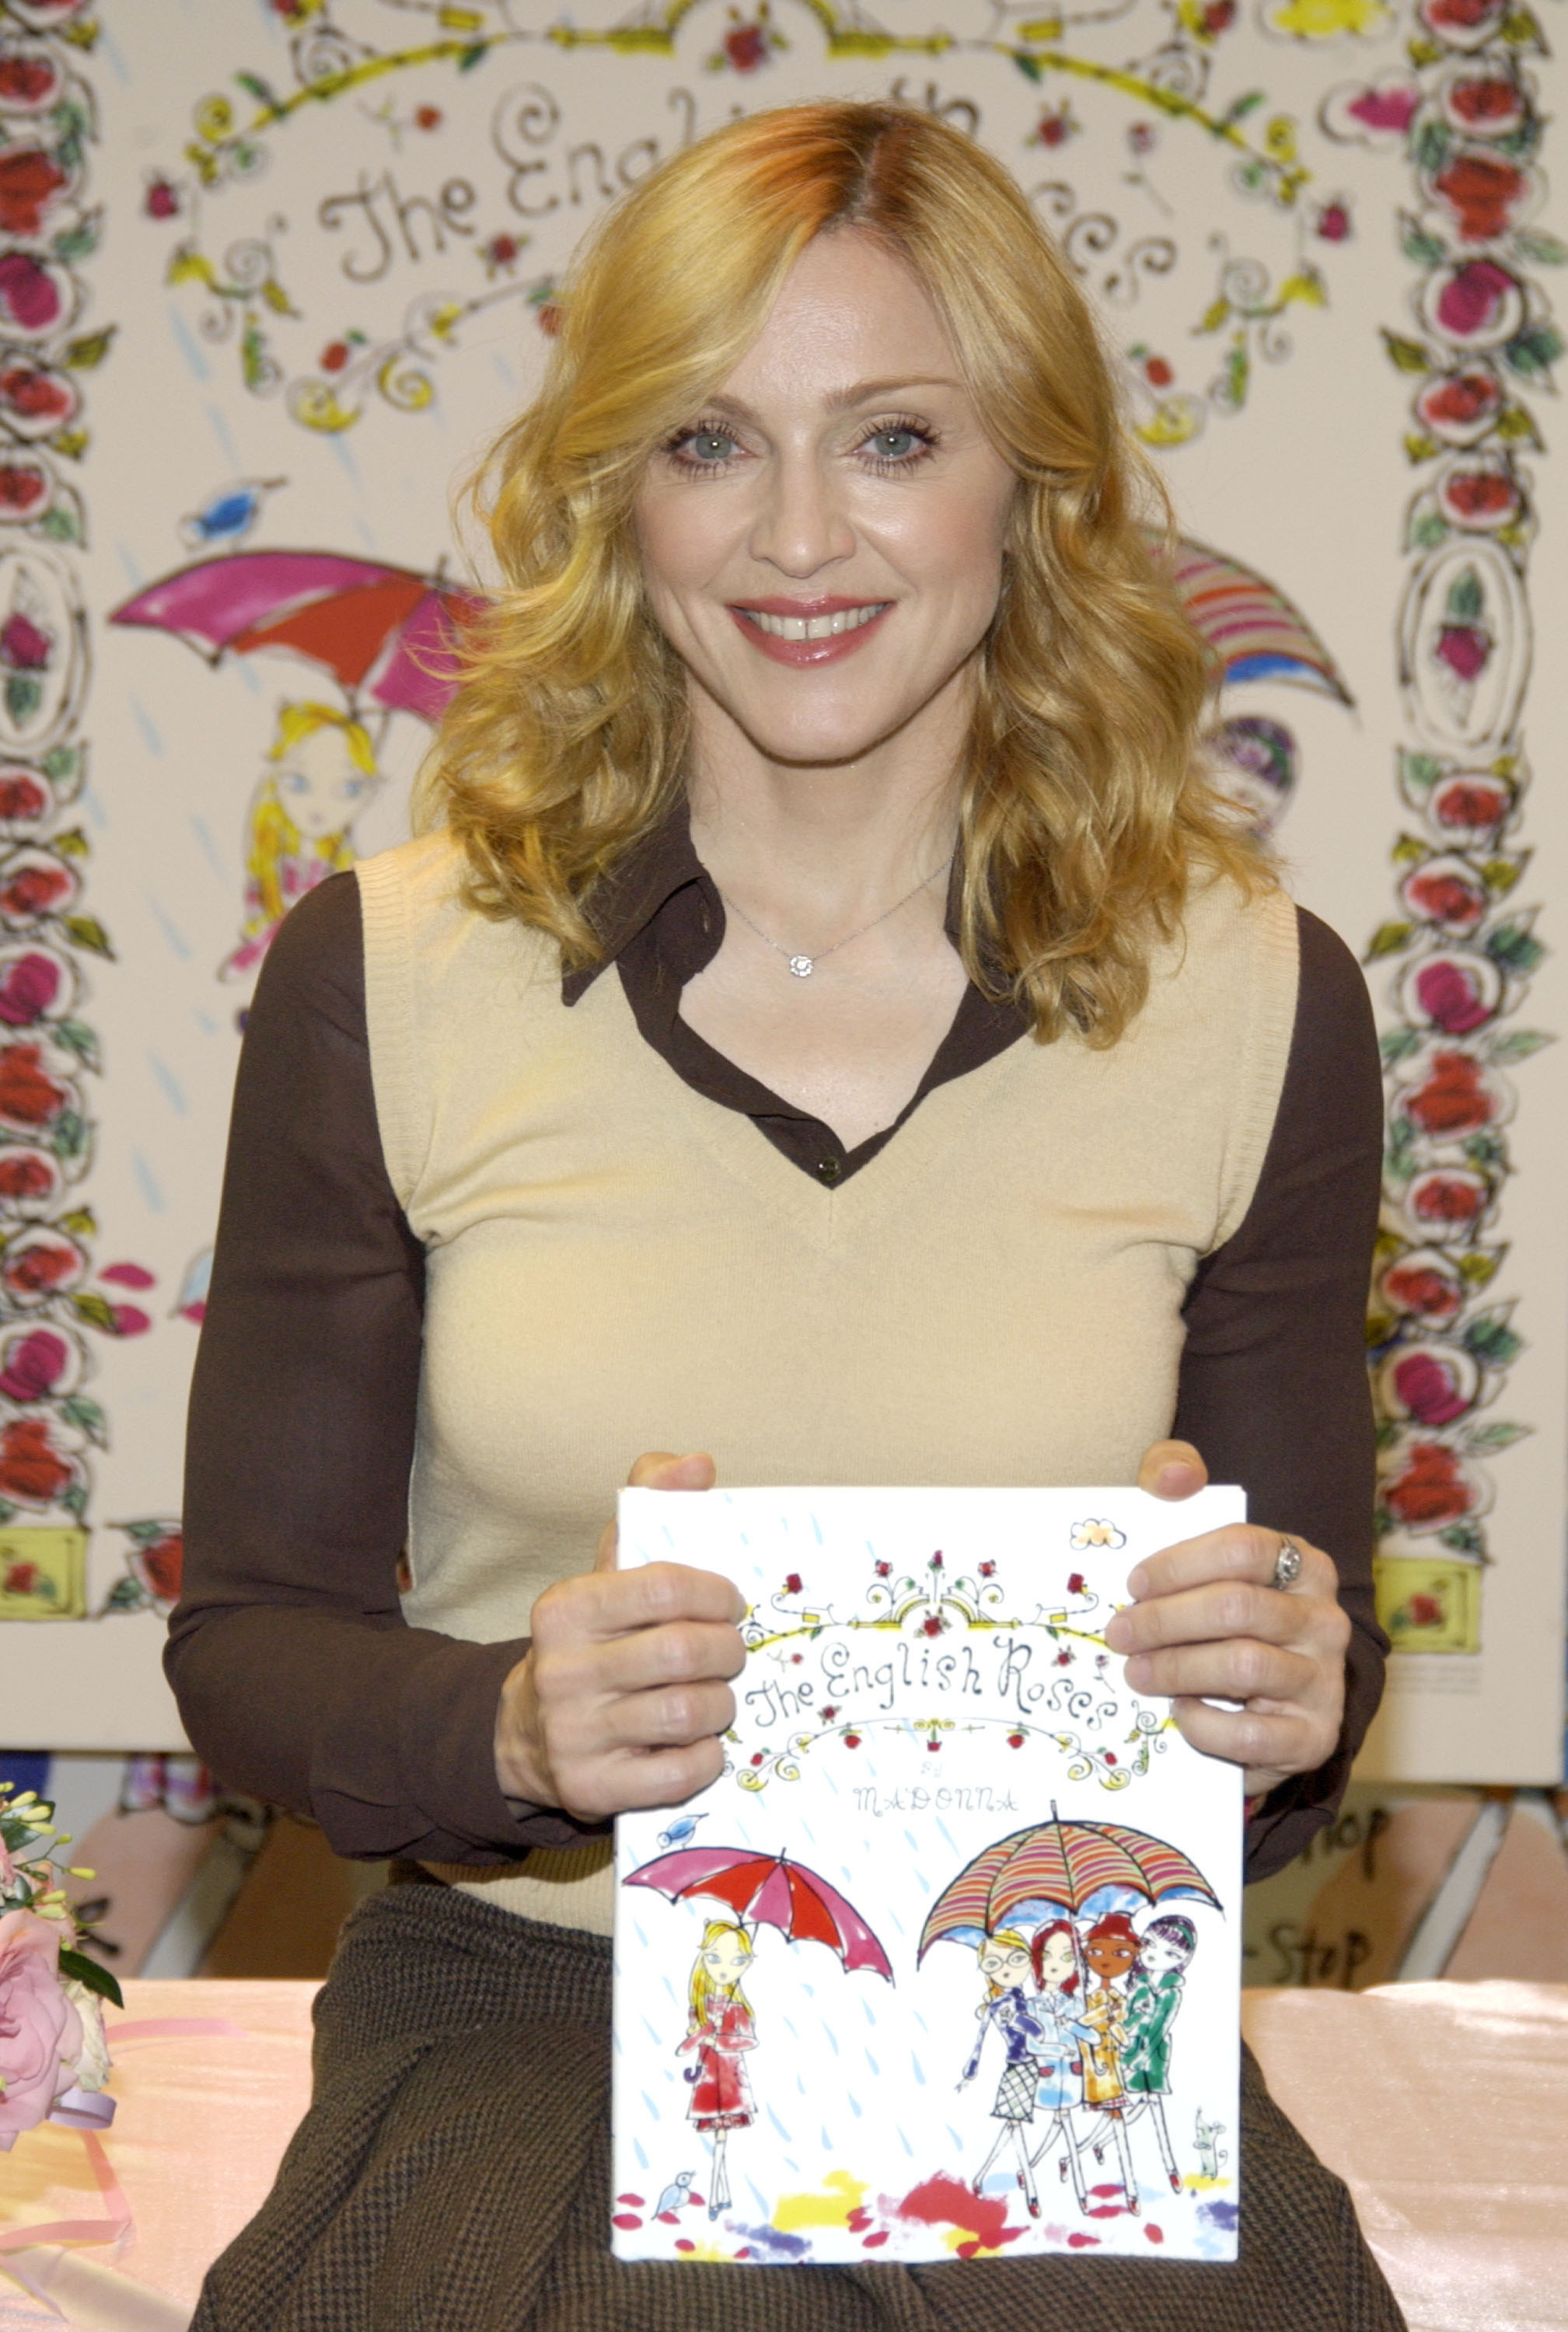 Madonna holding a copy of The English Roses 